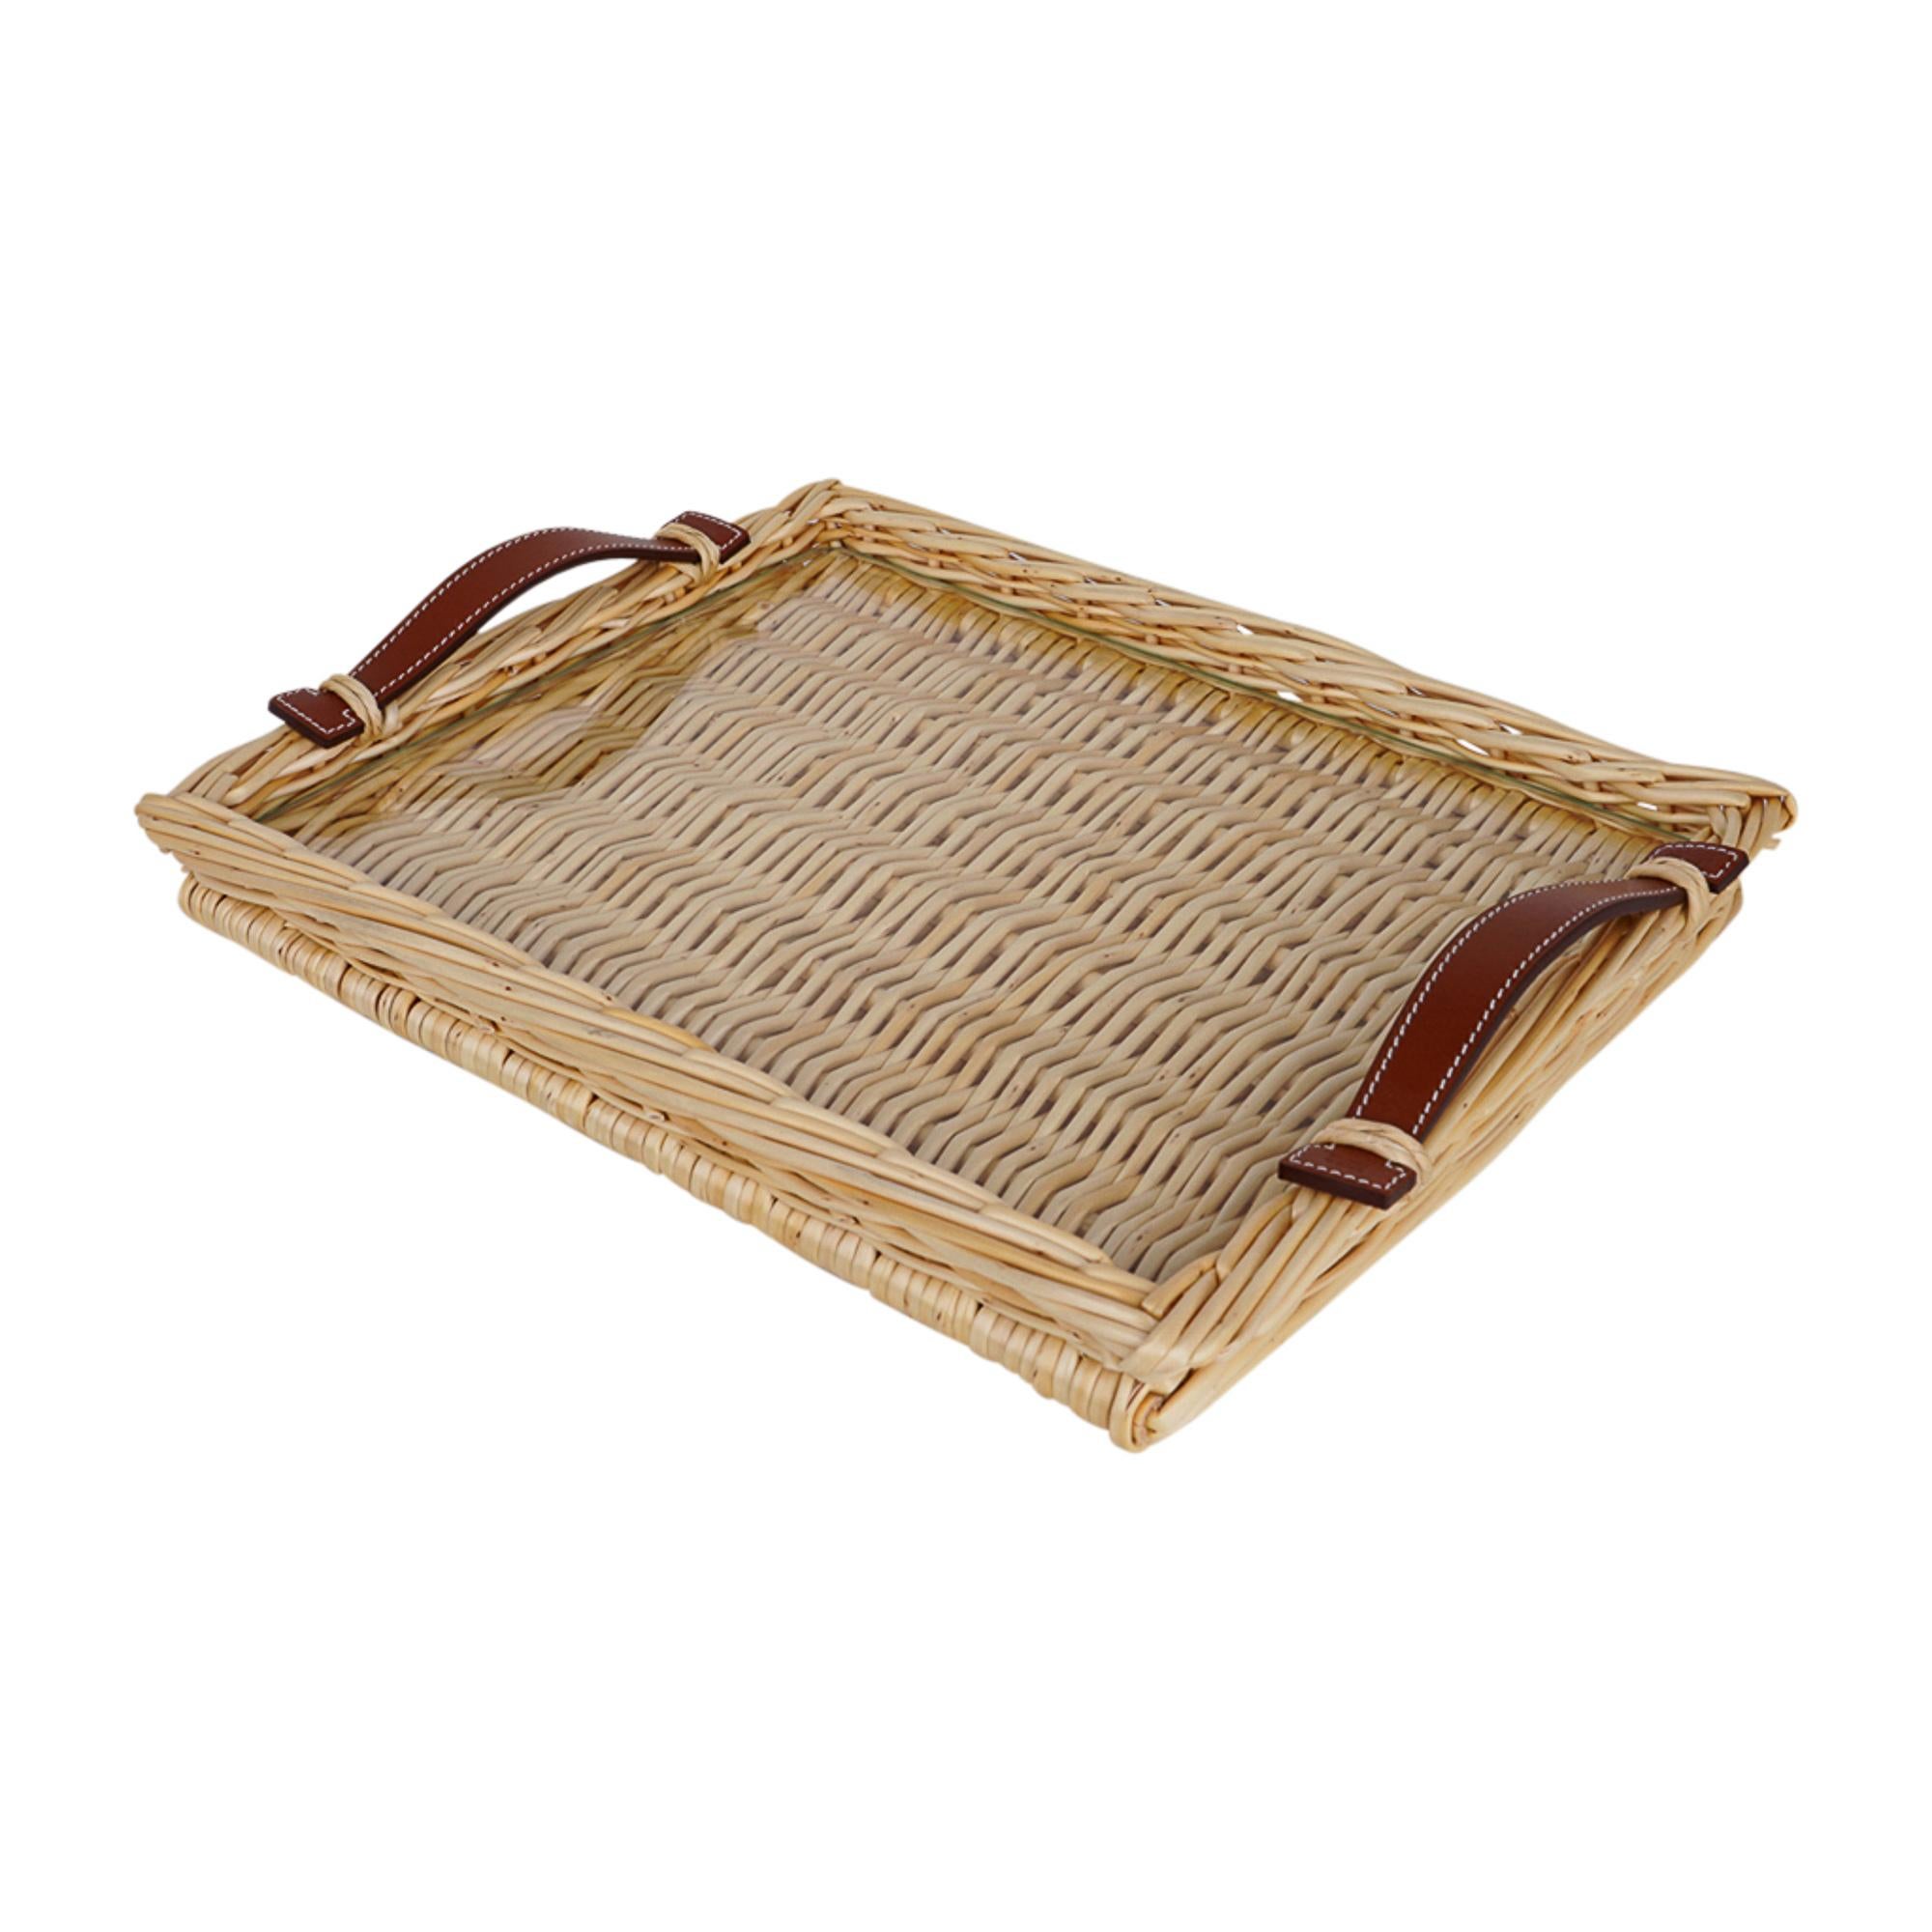 Mightychic offers a guaranteed authentic Hermes Oseraie Very, Very Small Model Rectangular serving tray with coveted Bridle leather handles.
Fitted glass interior.
Leather has signature Hermes stamp.
Timeless piece also makes for a special gift